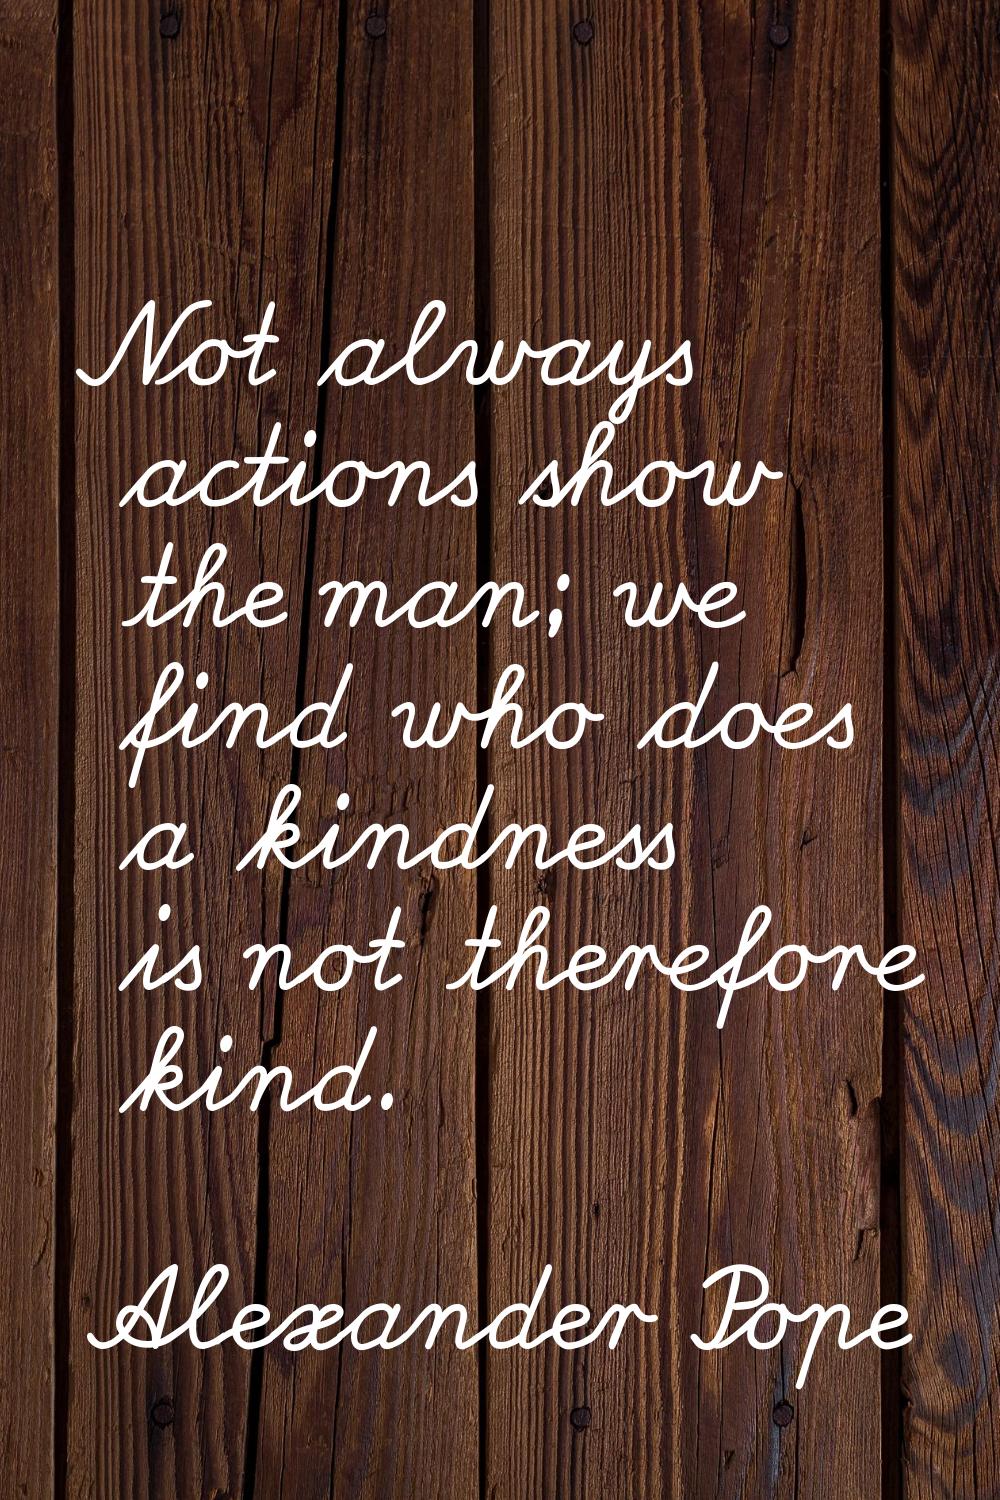 Not always actions show the man; we find who does a kindness is not therefore kind.